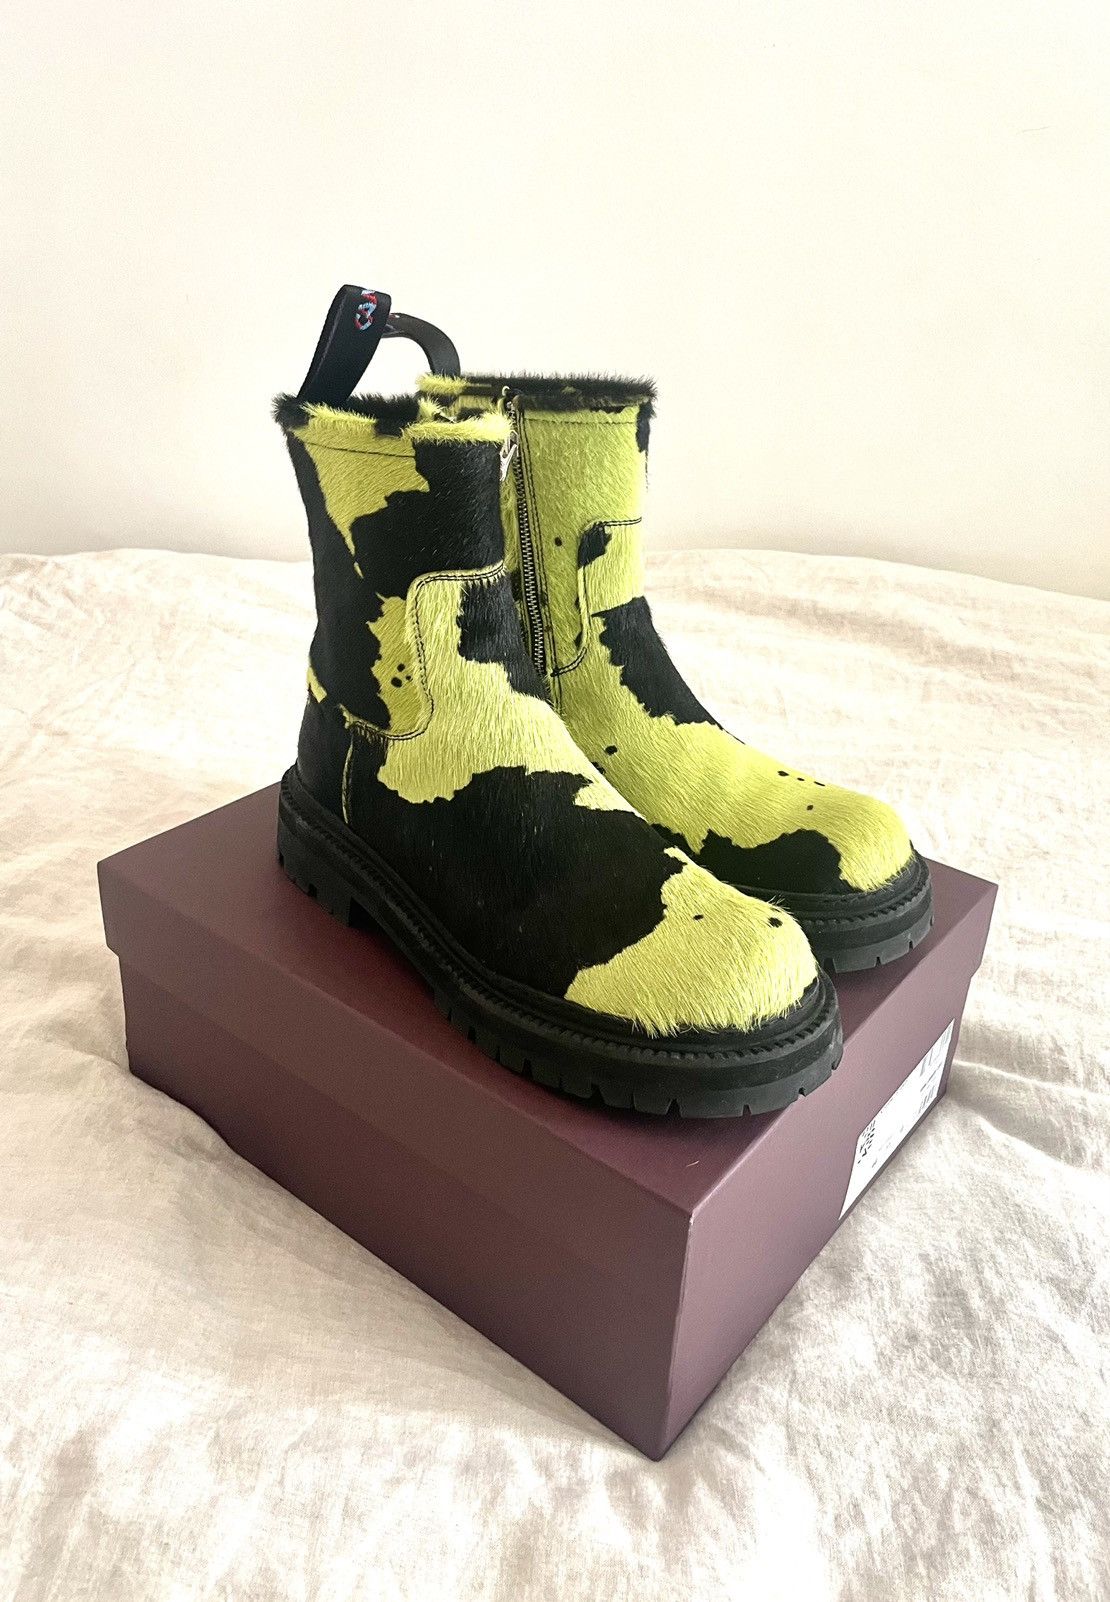 Camper “CrazyCow” Green and Black Eki Zip Up Boots | Grailed